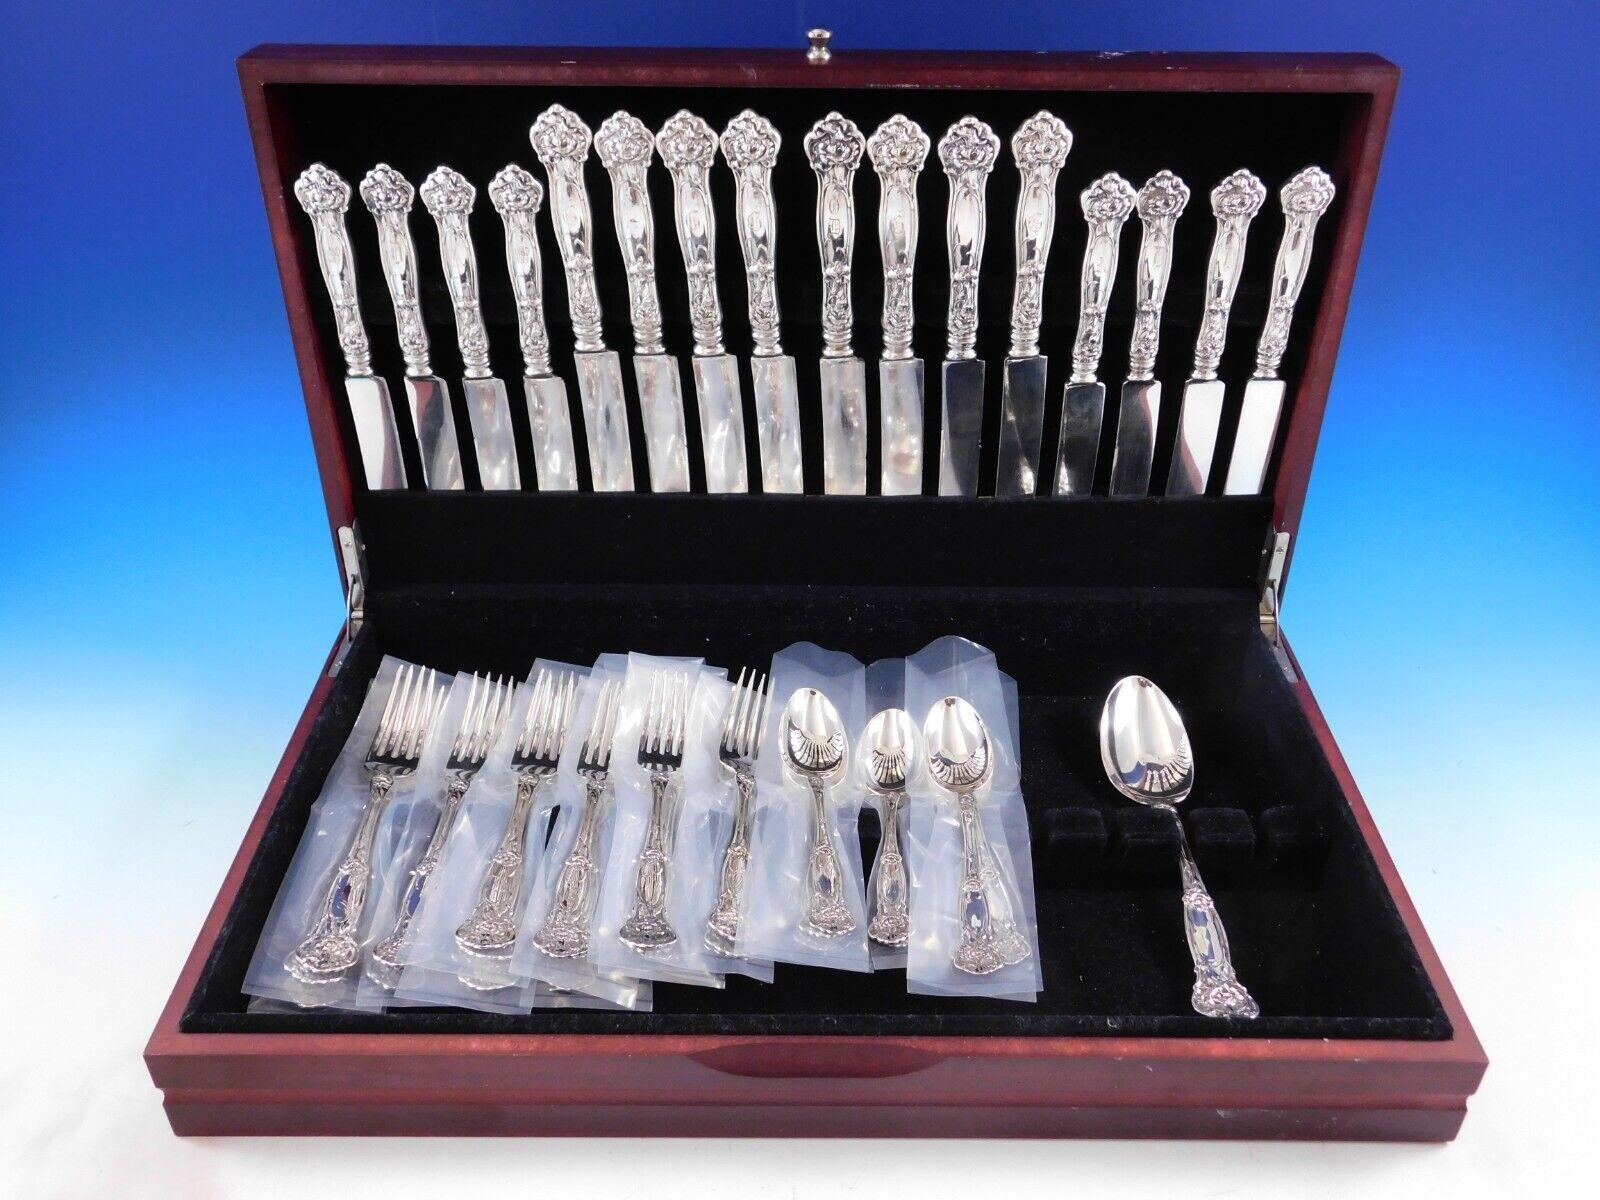 Dinner and Luncheon Size Carnation by Reed & Barton Sterling Silver flatware set - 41 pieces. This set includes:

8 Dinner Size Knives, 9 7/8